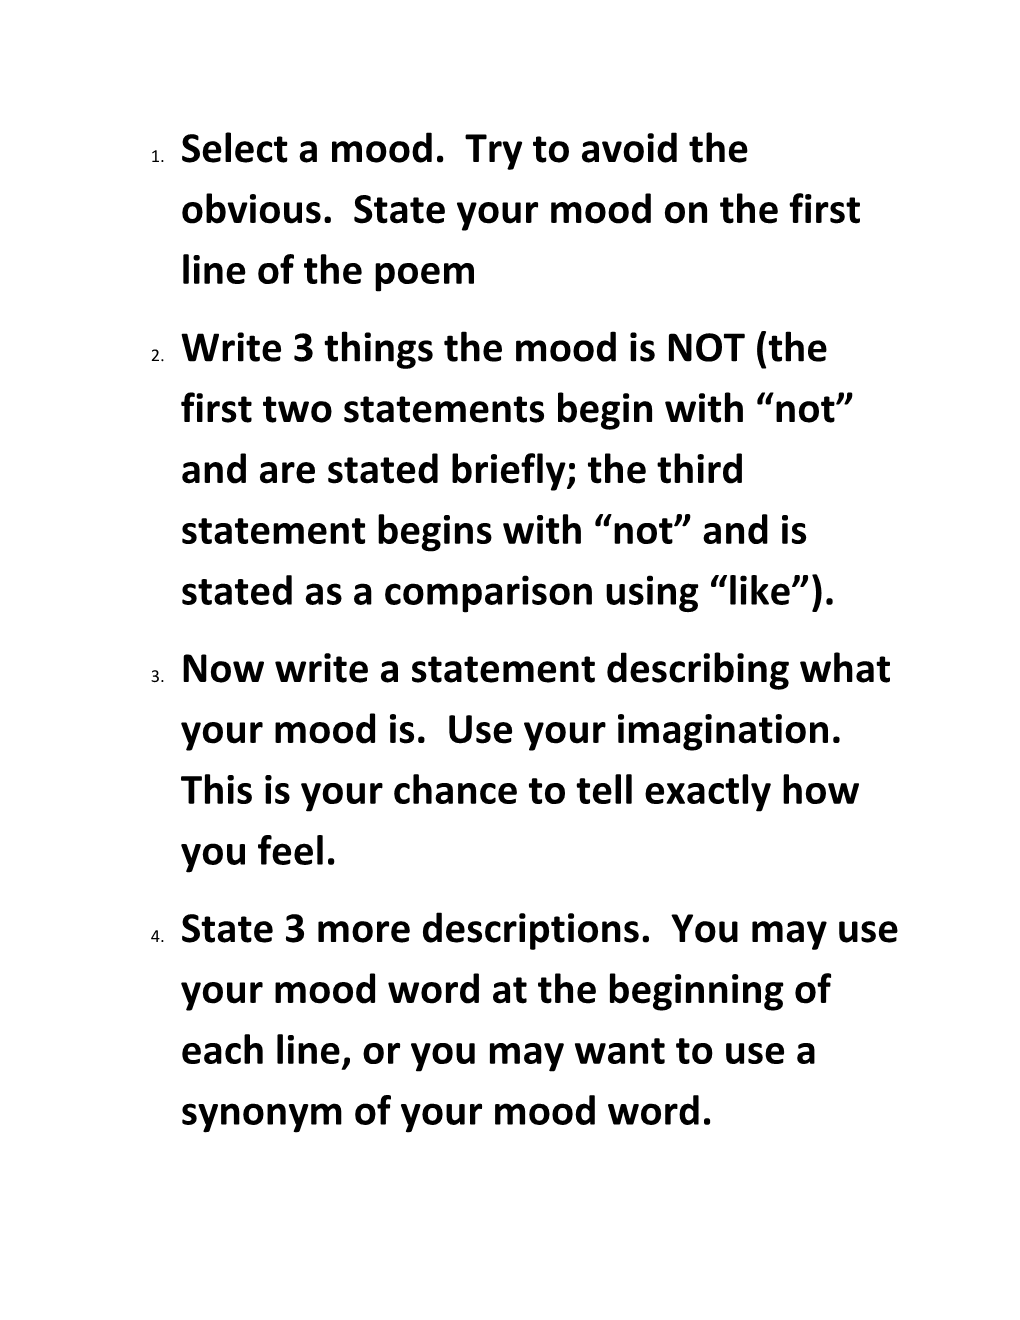 1. Select a Mood. Try to Avoid the Obvious. State Your Mood on the First Line of the Poem